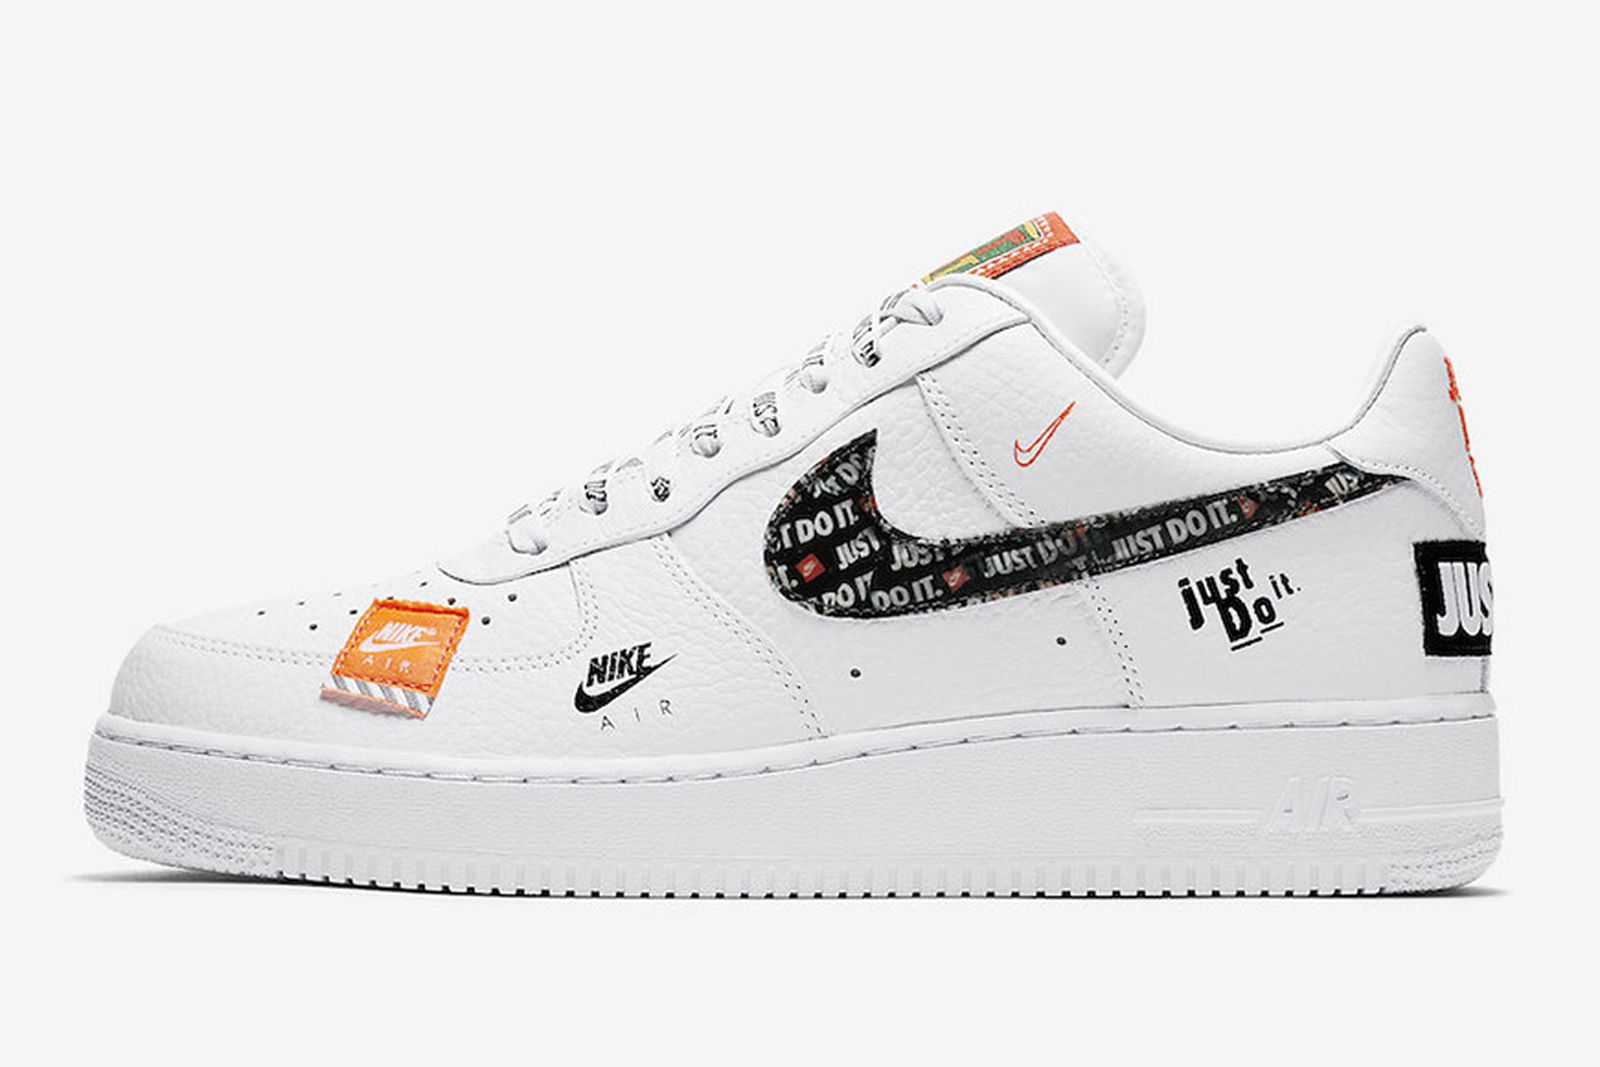 Air Force 1 "Just Do It": Release Date, Price, More Info